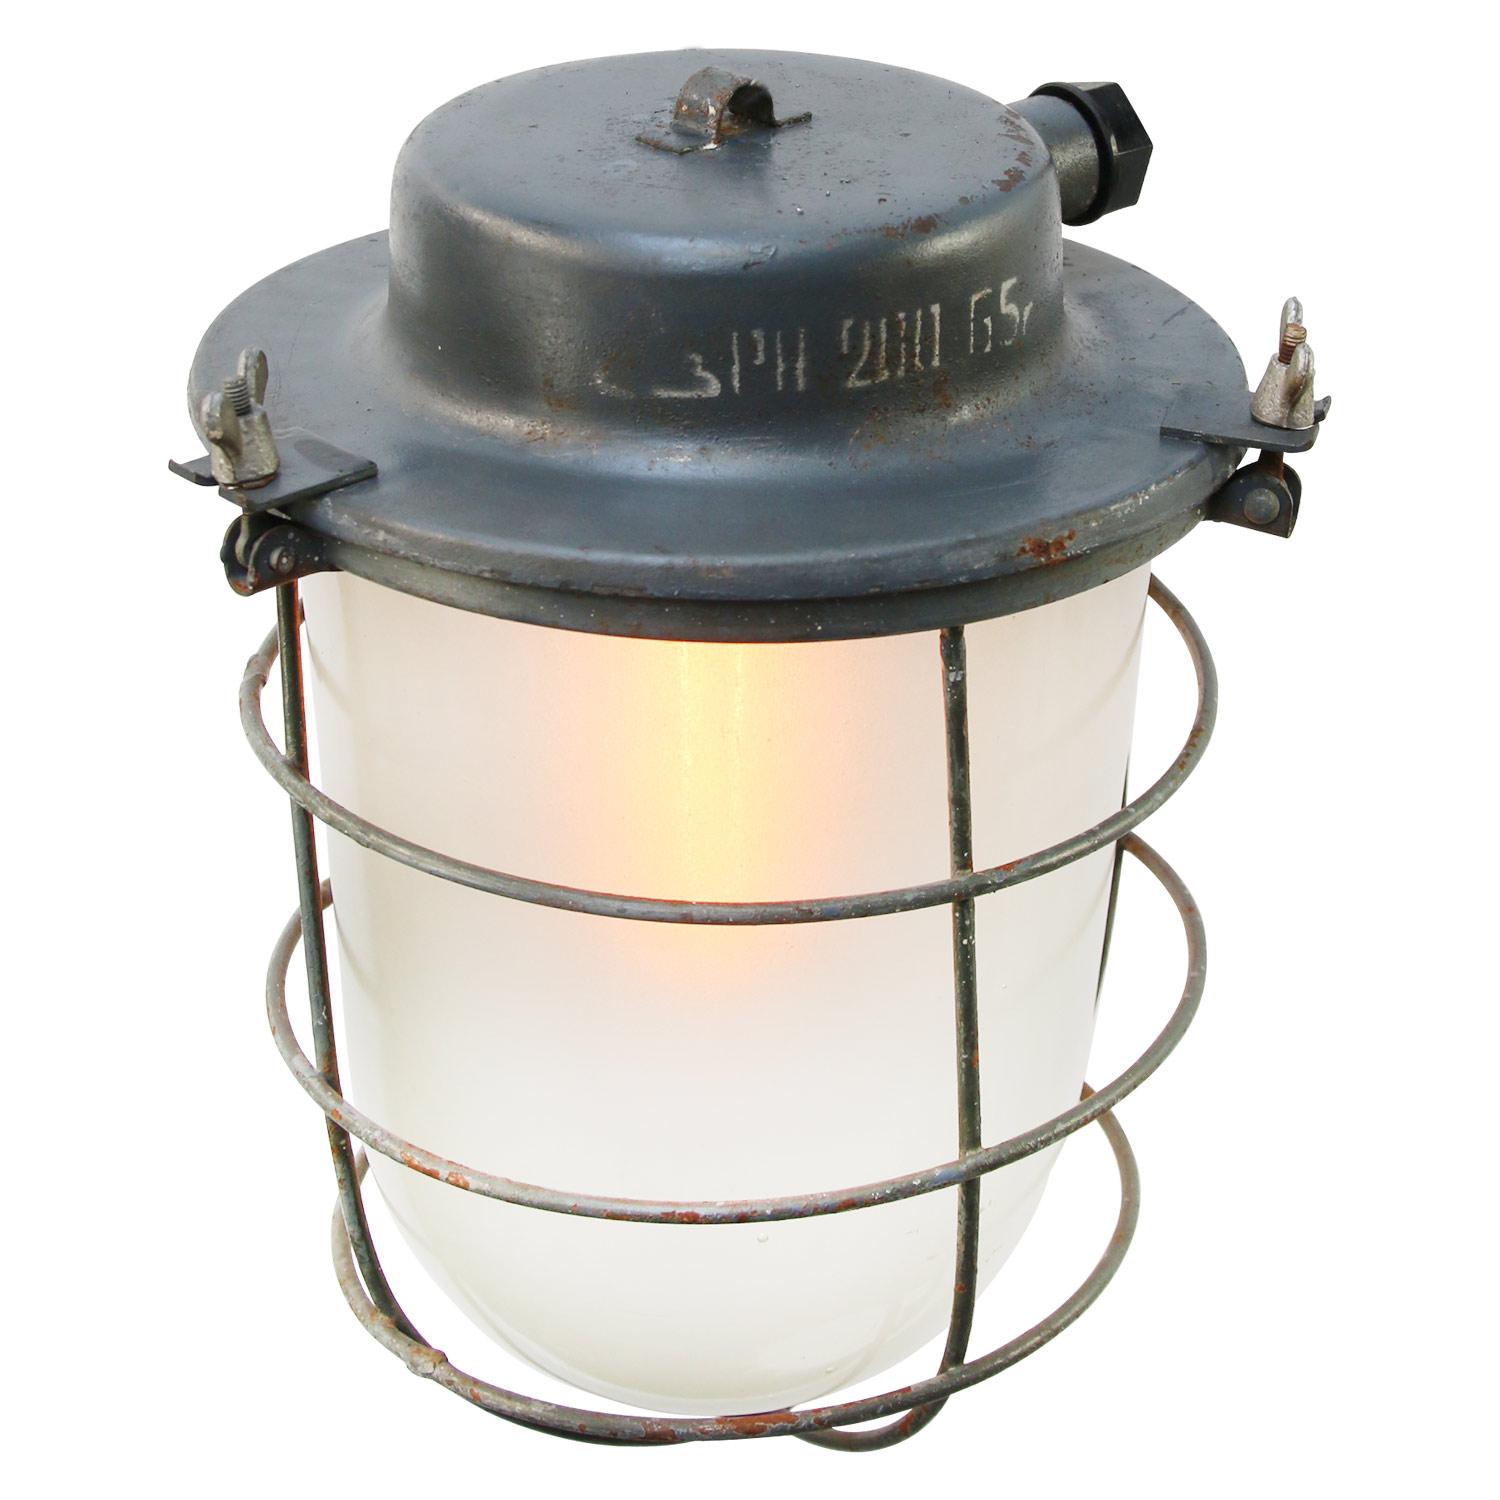 Vintage industrial hanging lamp
Blue / grey metal clear glass

Weight: 4.00 kg / 8.8 lb

For use outdoors as well as indoors. 

Priced per individual item. All lamps have been made suitable by international standards for incandescent light bulbs,